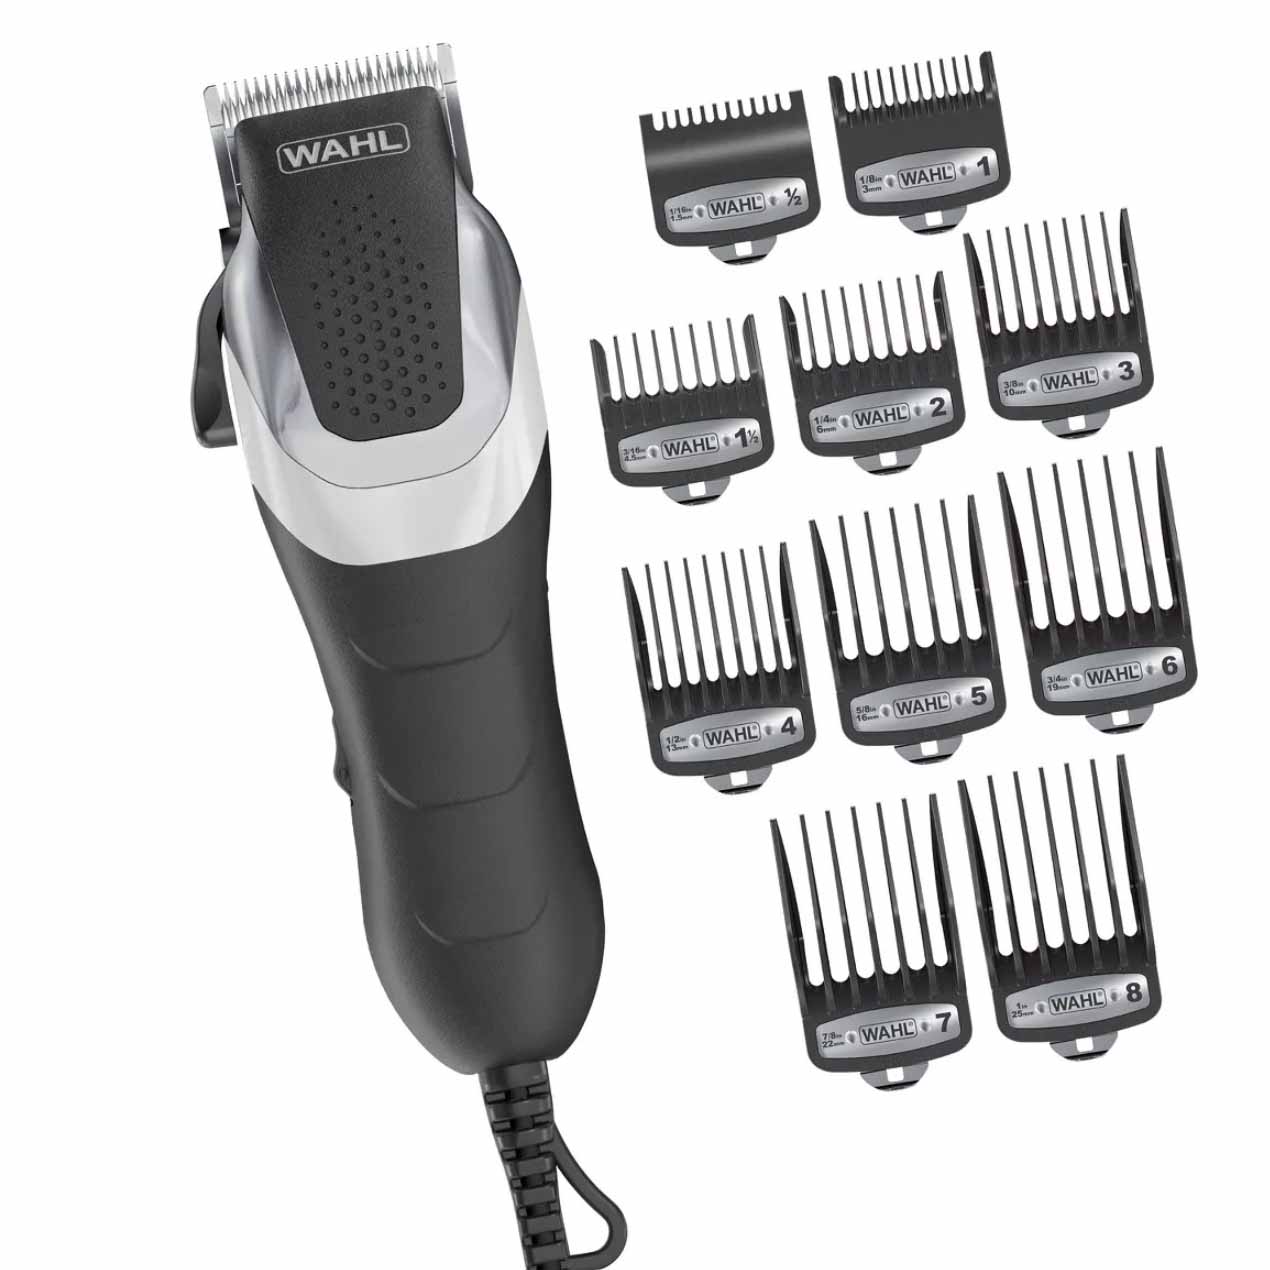 Black Wahl clipper with different trimming heads